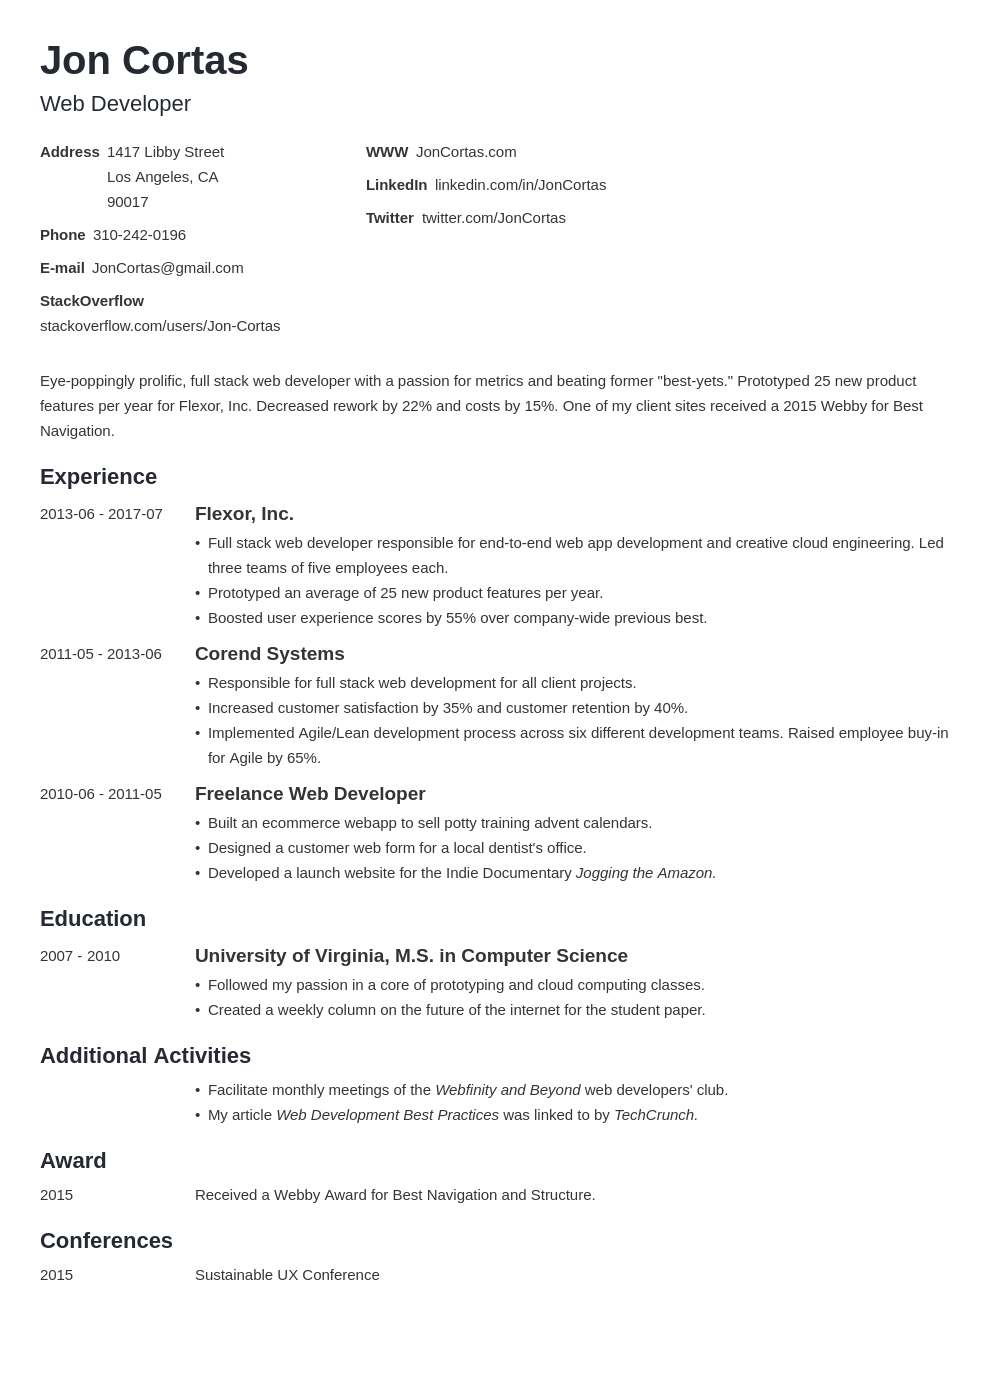 Web Developer Resume Examples 2018 from cdn-images.zety.com